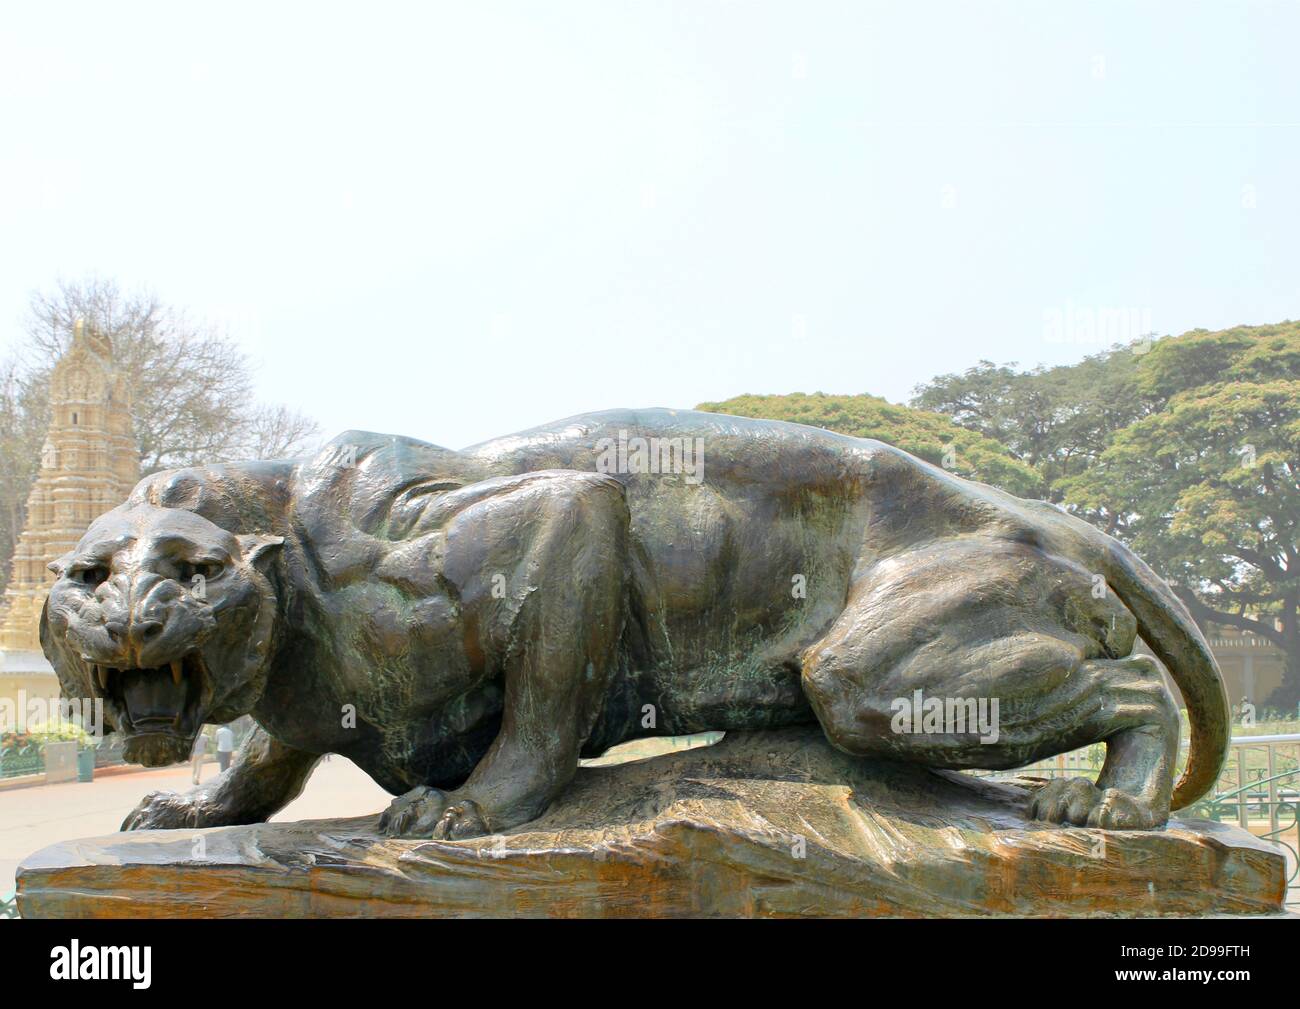 https://c8.alamy.com/comp/2D99FTH/the-mysore-leopard-statue-which-stands-outside-of-mysore-palace-in-karnataka-india-2D99FTH.jpg